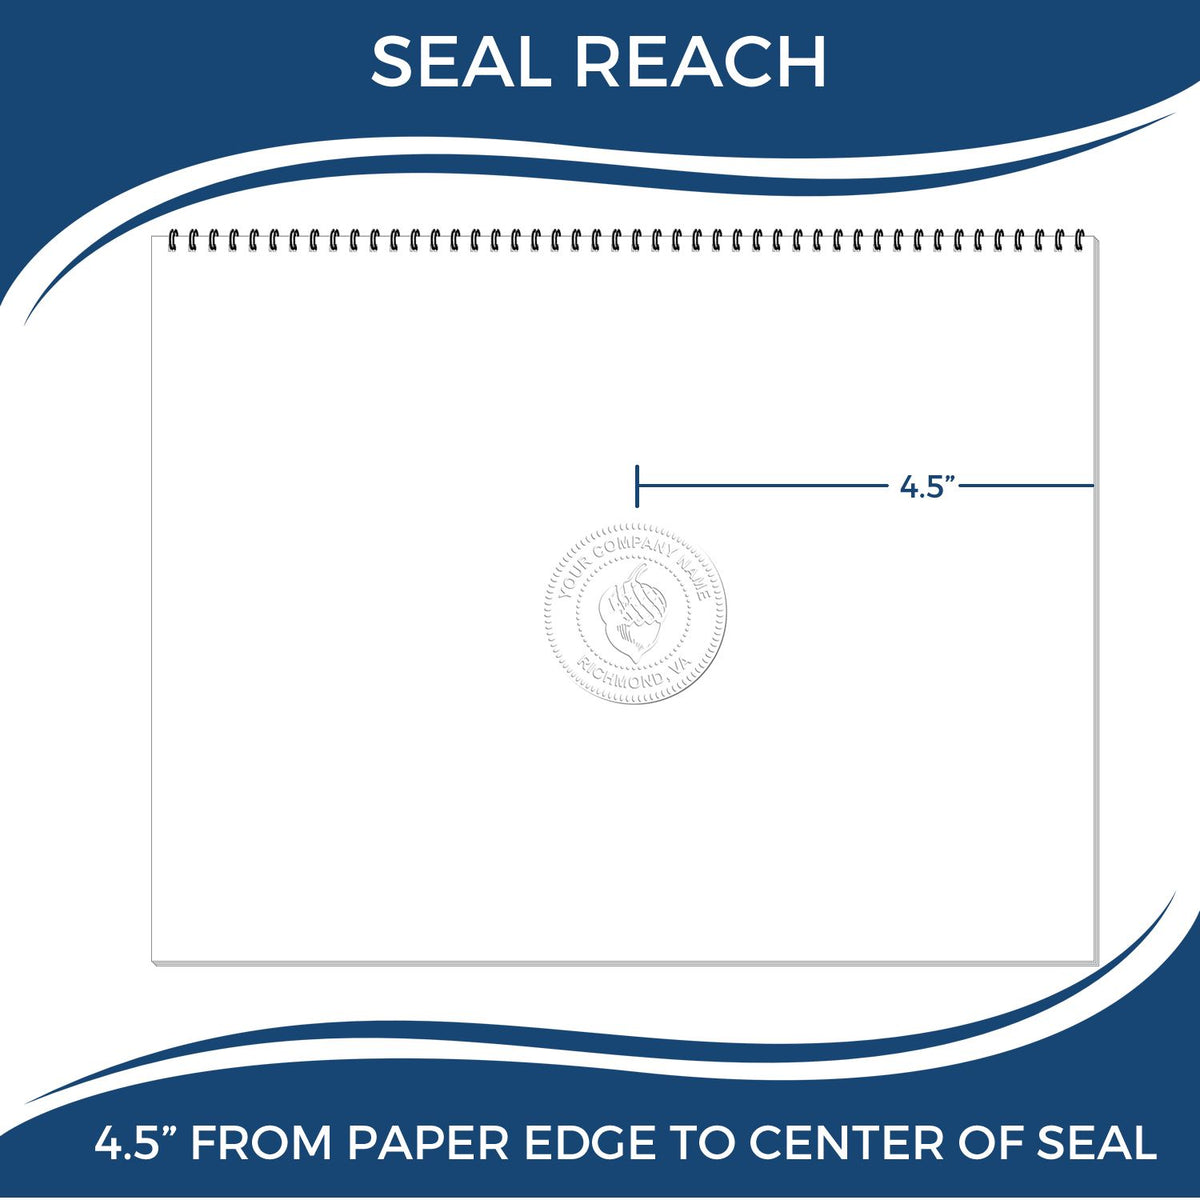 An infographic showing the seal reach which is represented by a ruler and a miniature seal image of the State of Vermont Extended Long Reach Geologist Seal